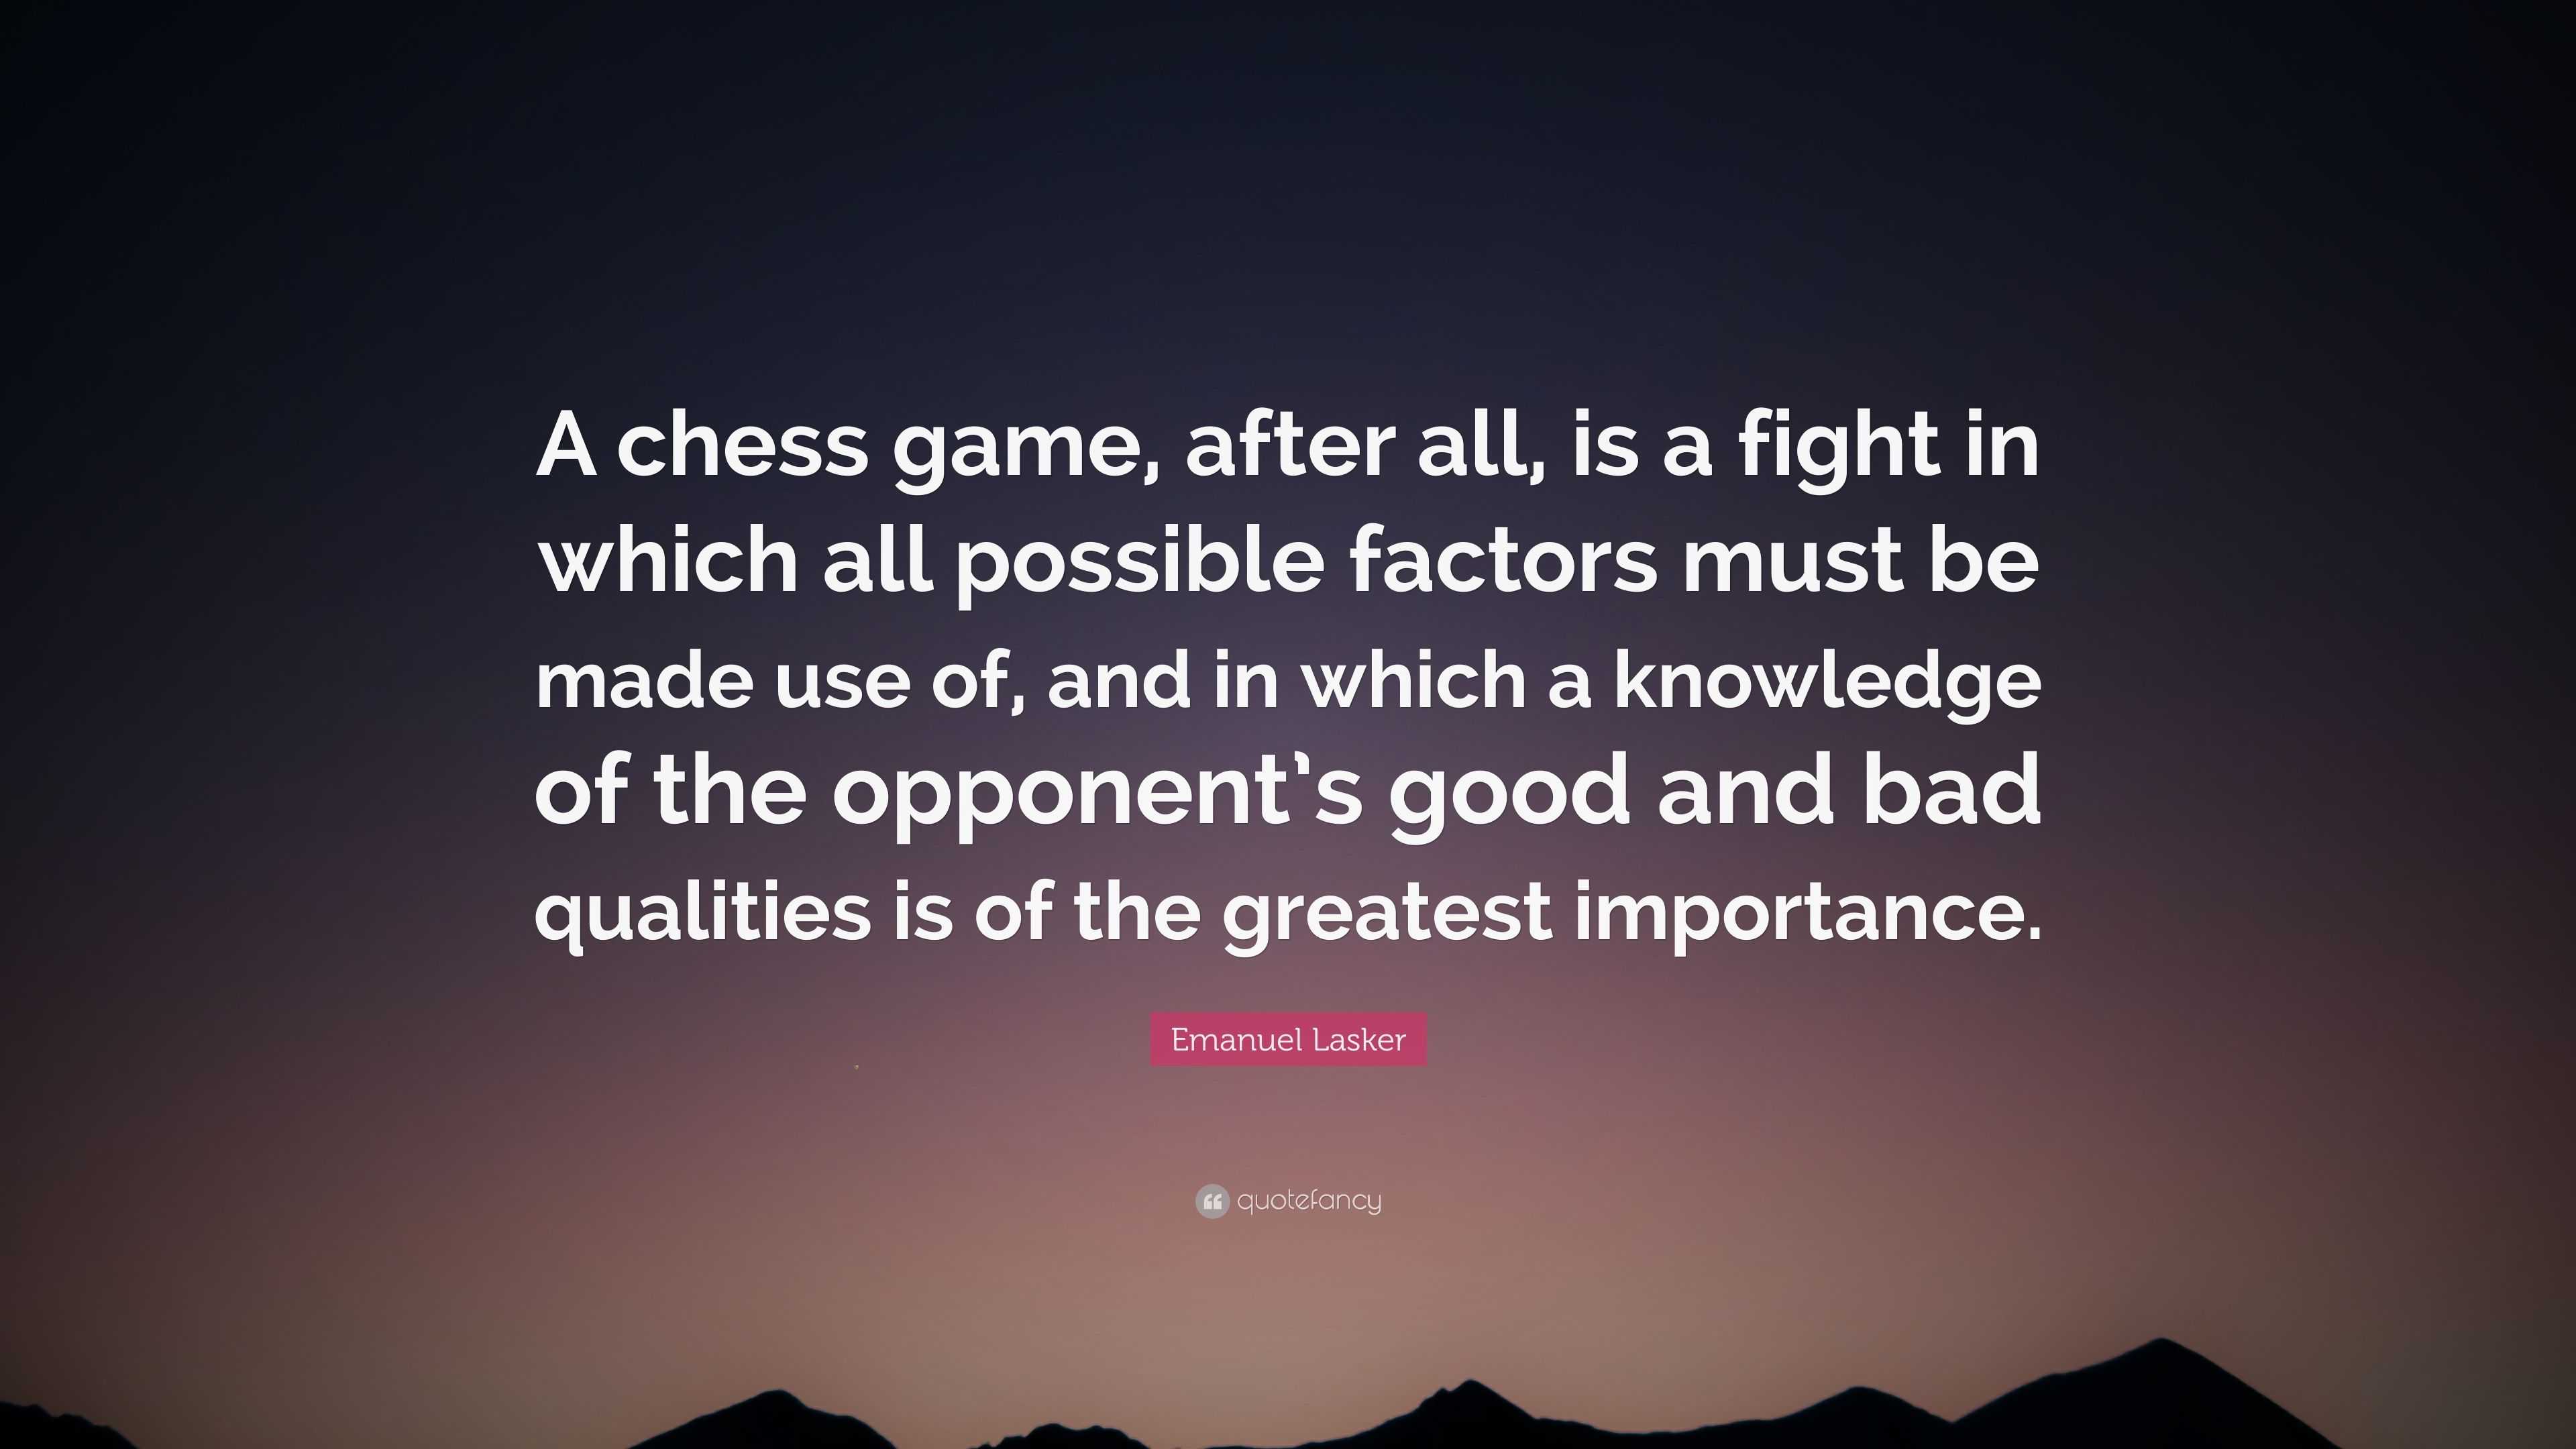 Is it harder to beat a bad chess player? - Quora